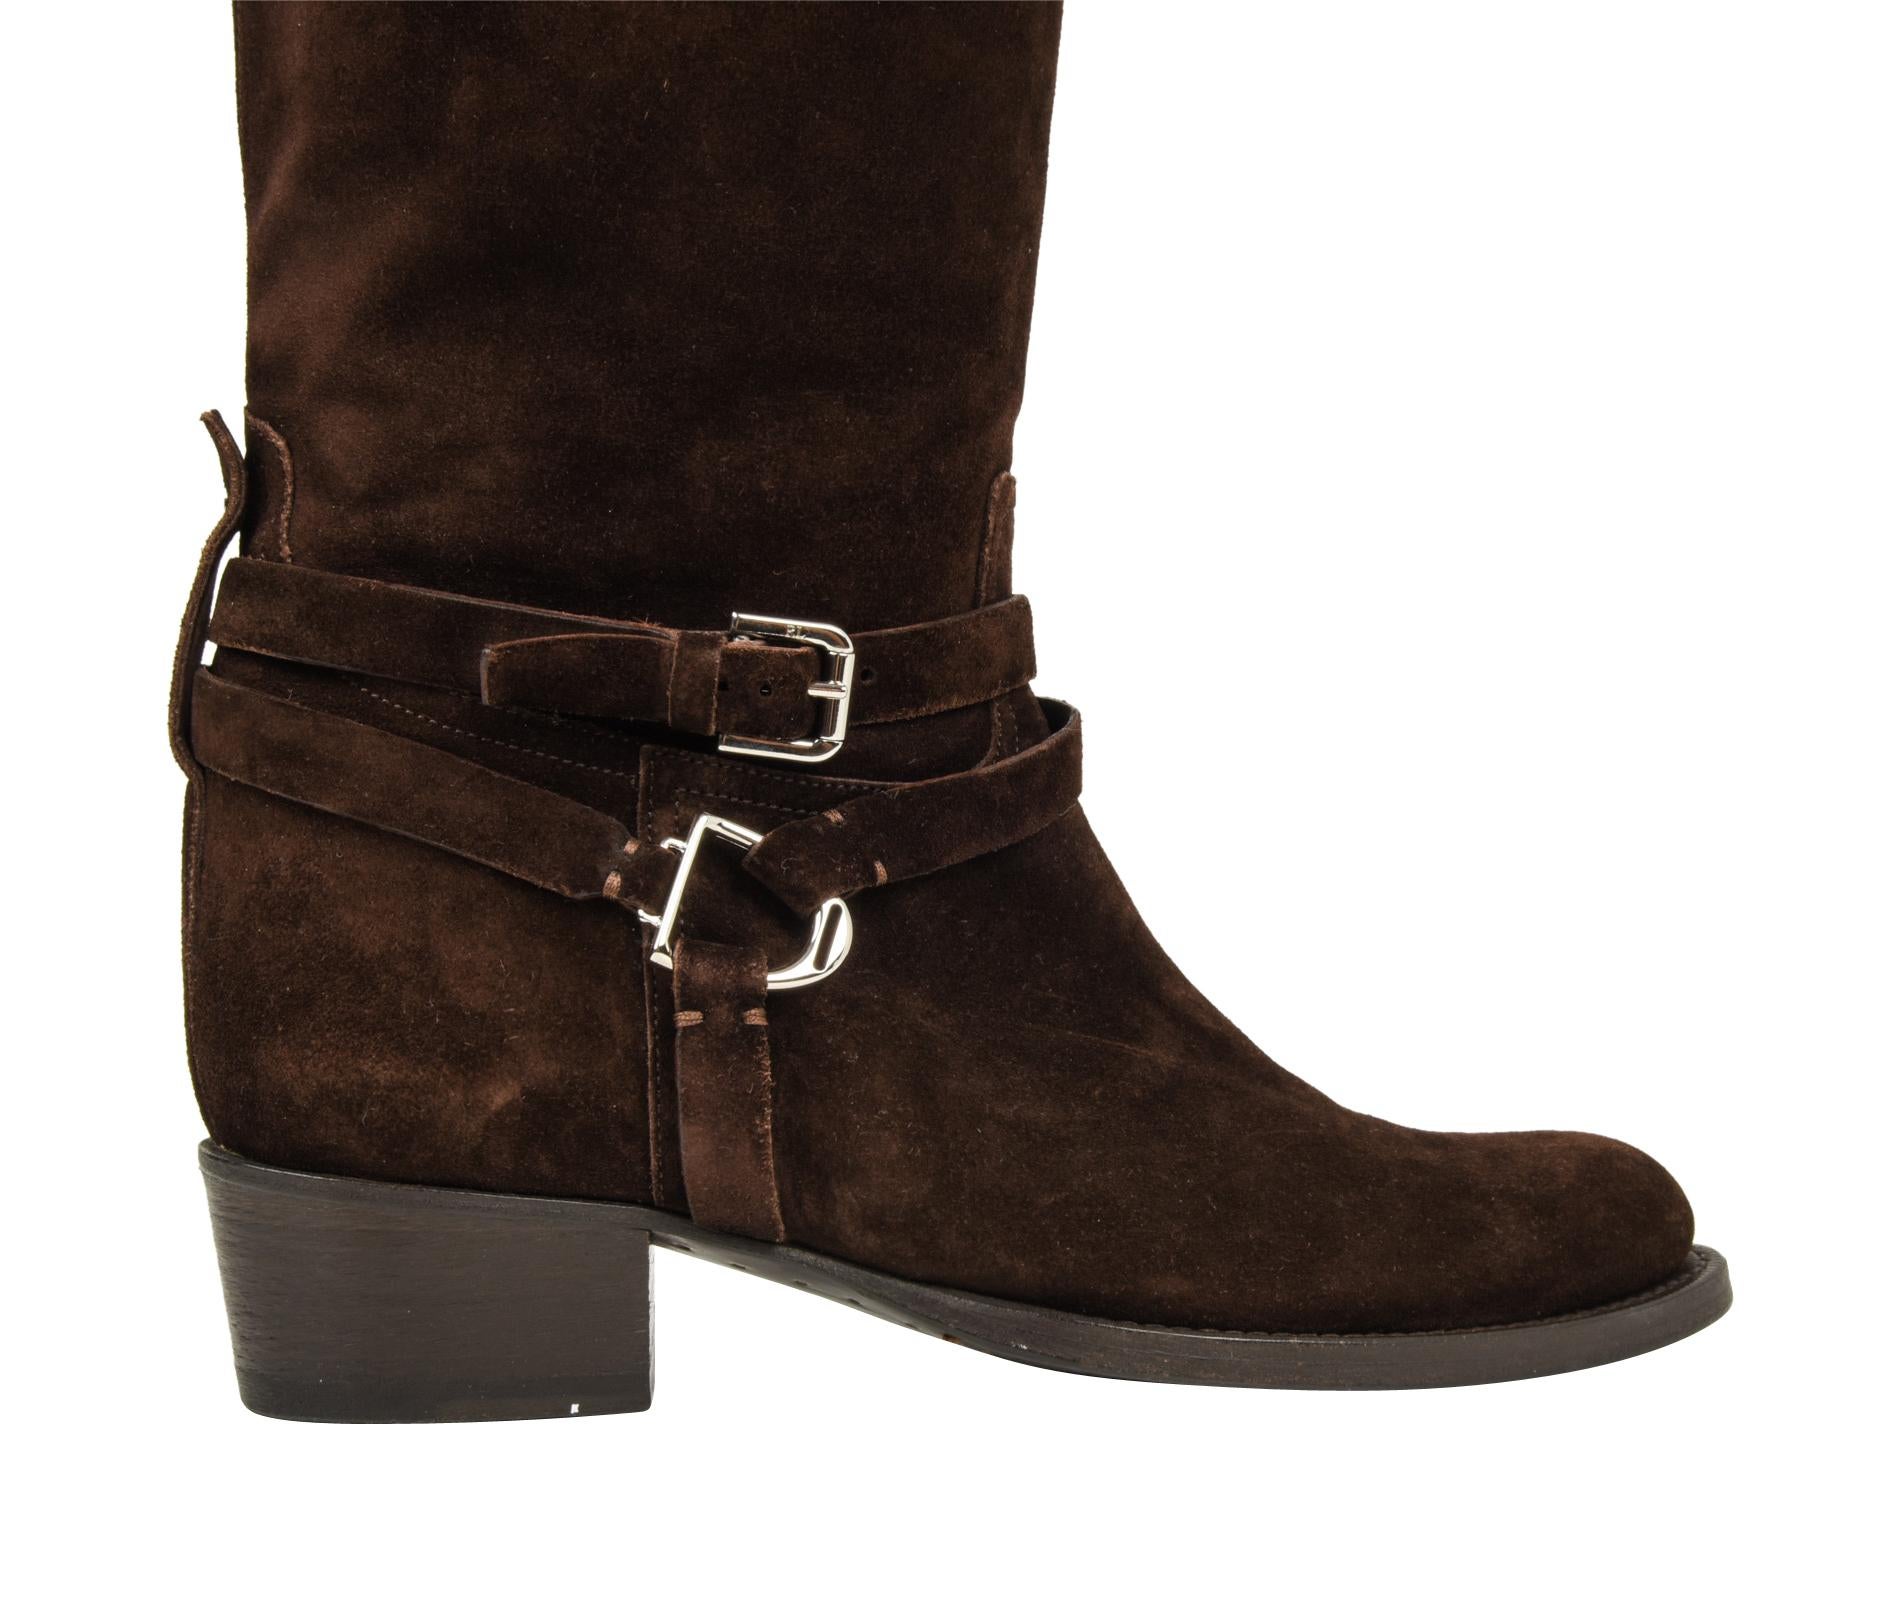 Guaranteed authentic fabulous Ralph Lauren Collection rich brown suede knee high boots.
Ankle has wrap around straps with a silver toned buckle and stirrup.
Rear tab holding straps has a small silver logo embossed stud.
Gently rounded toe and dark